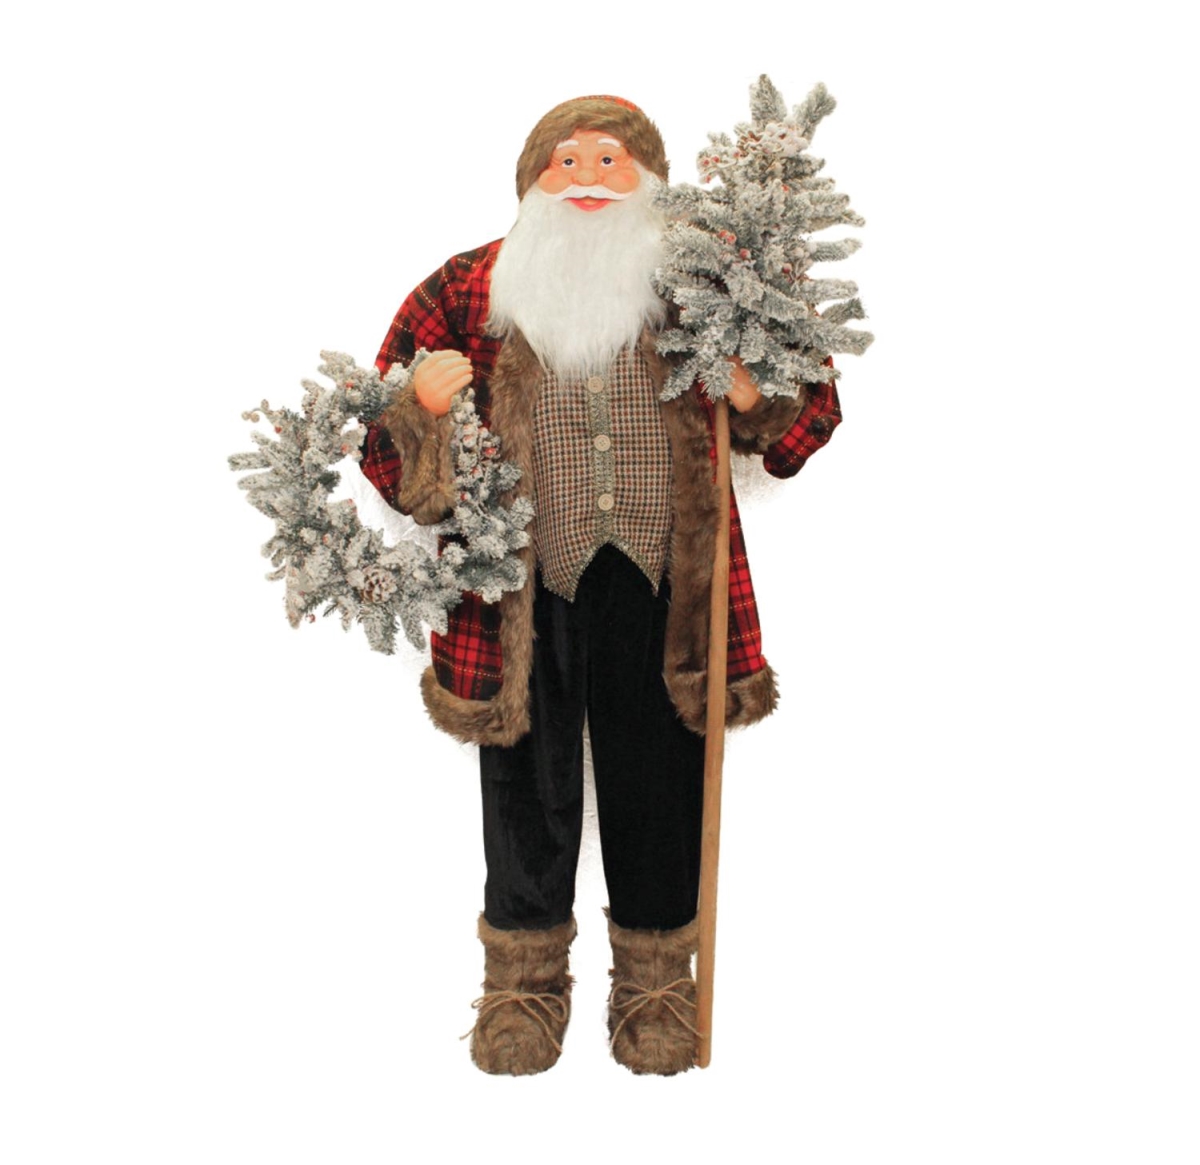 32266436 5 in. Standing Jolly Santa Claus Christmas Figure with Flocked Alpine Tree & Wreath -  NorthLight